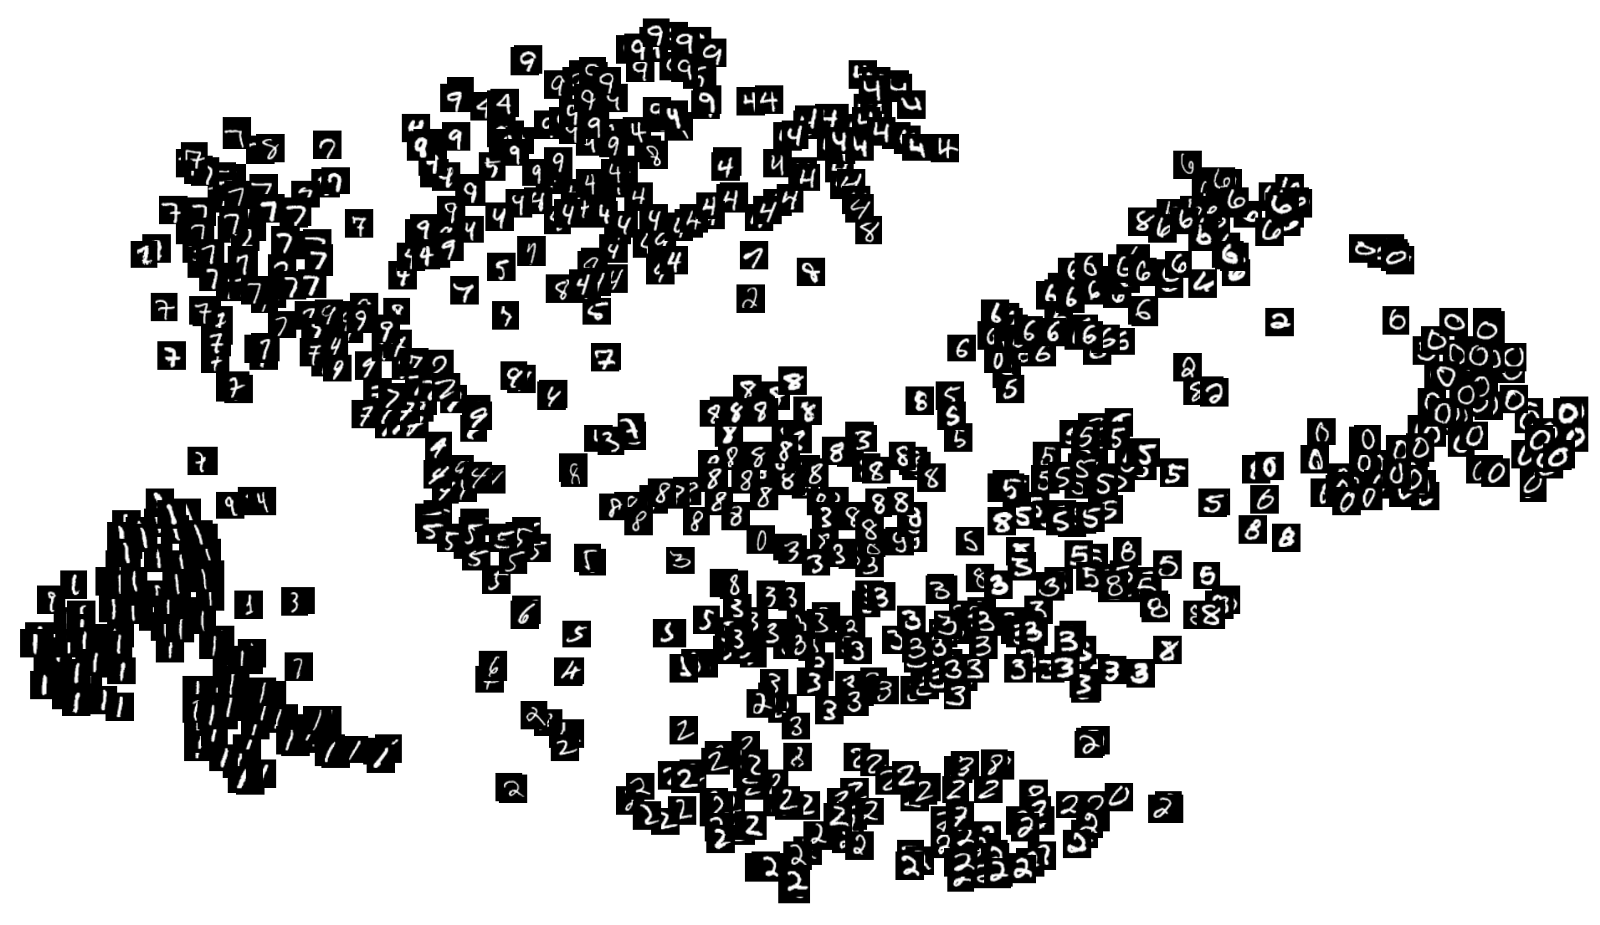 ep:labs:14._clustering.png